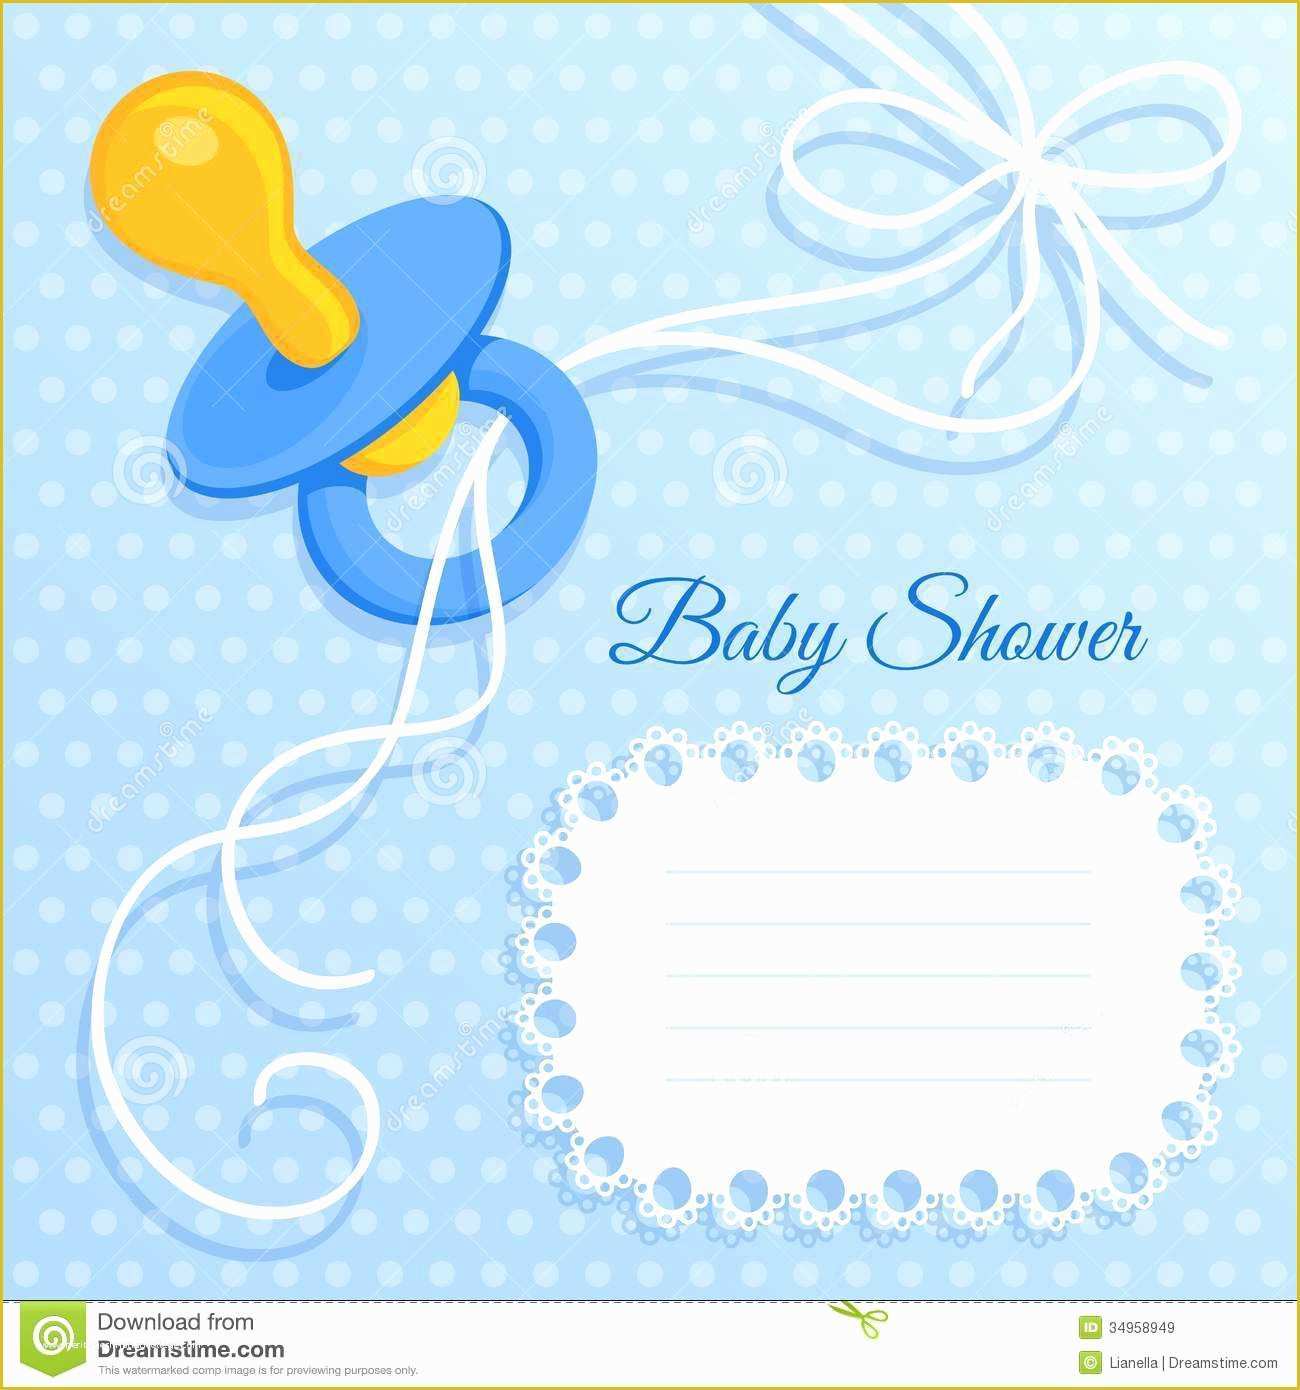 Free Online Baby Shower Invitations Templates Of Baby Shower Invitations Cards Designs Baby Shower